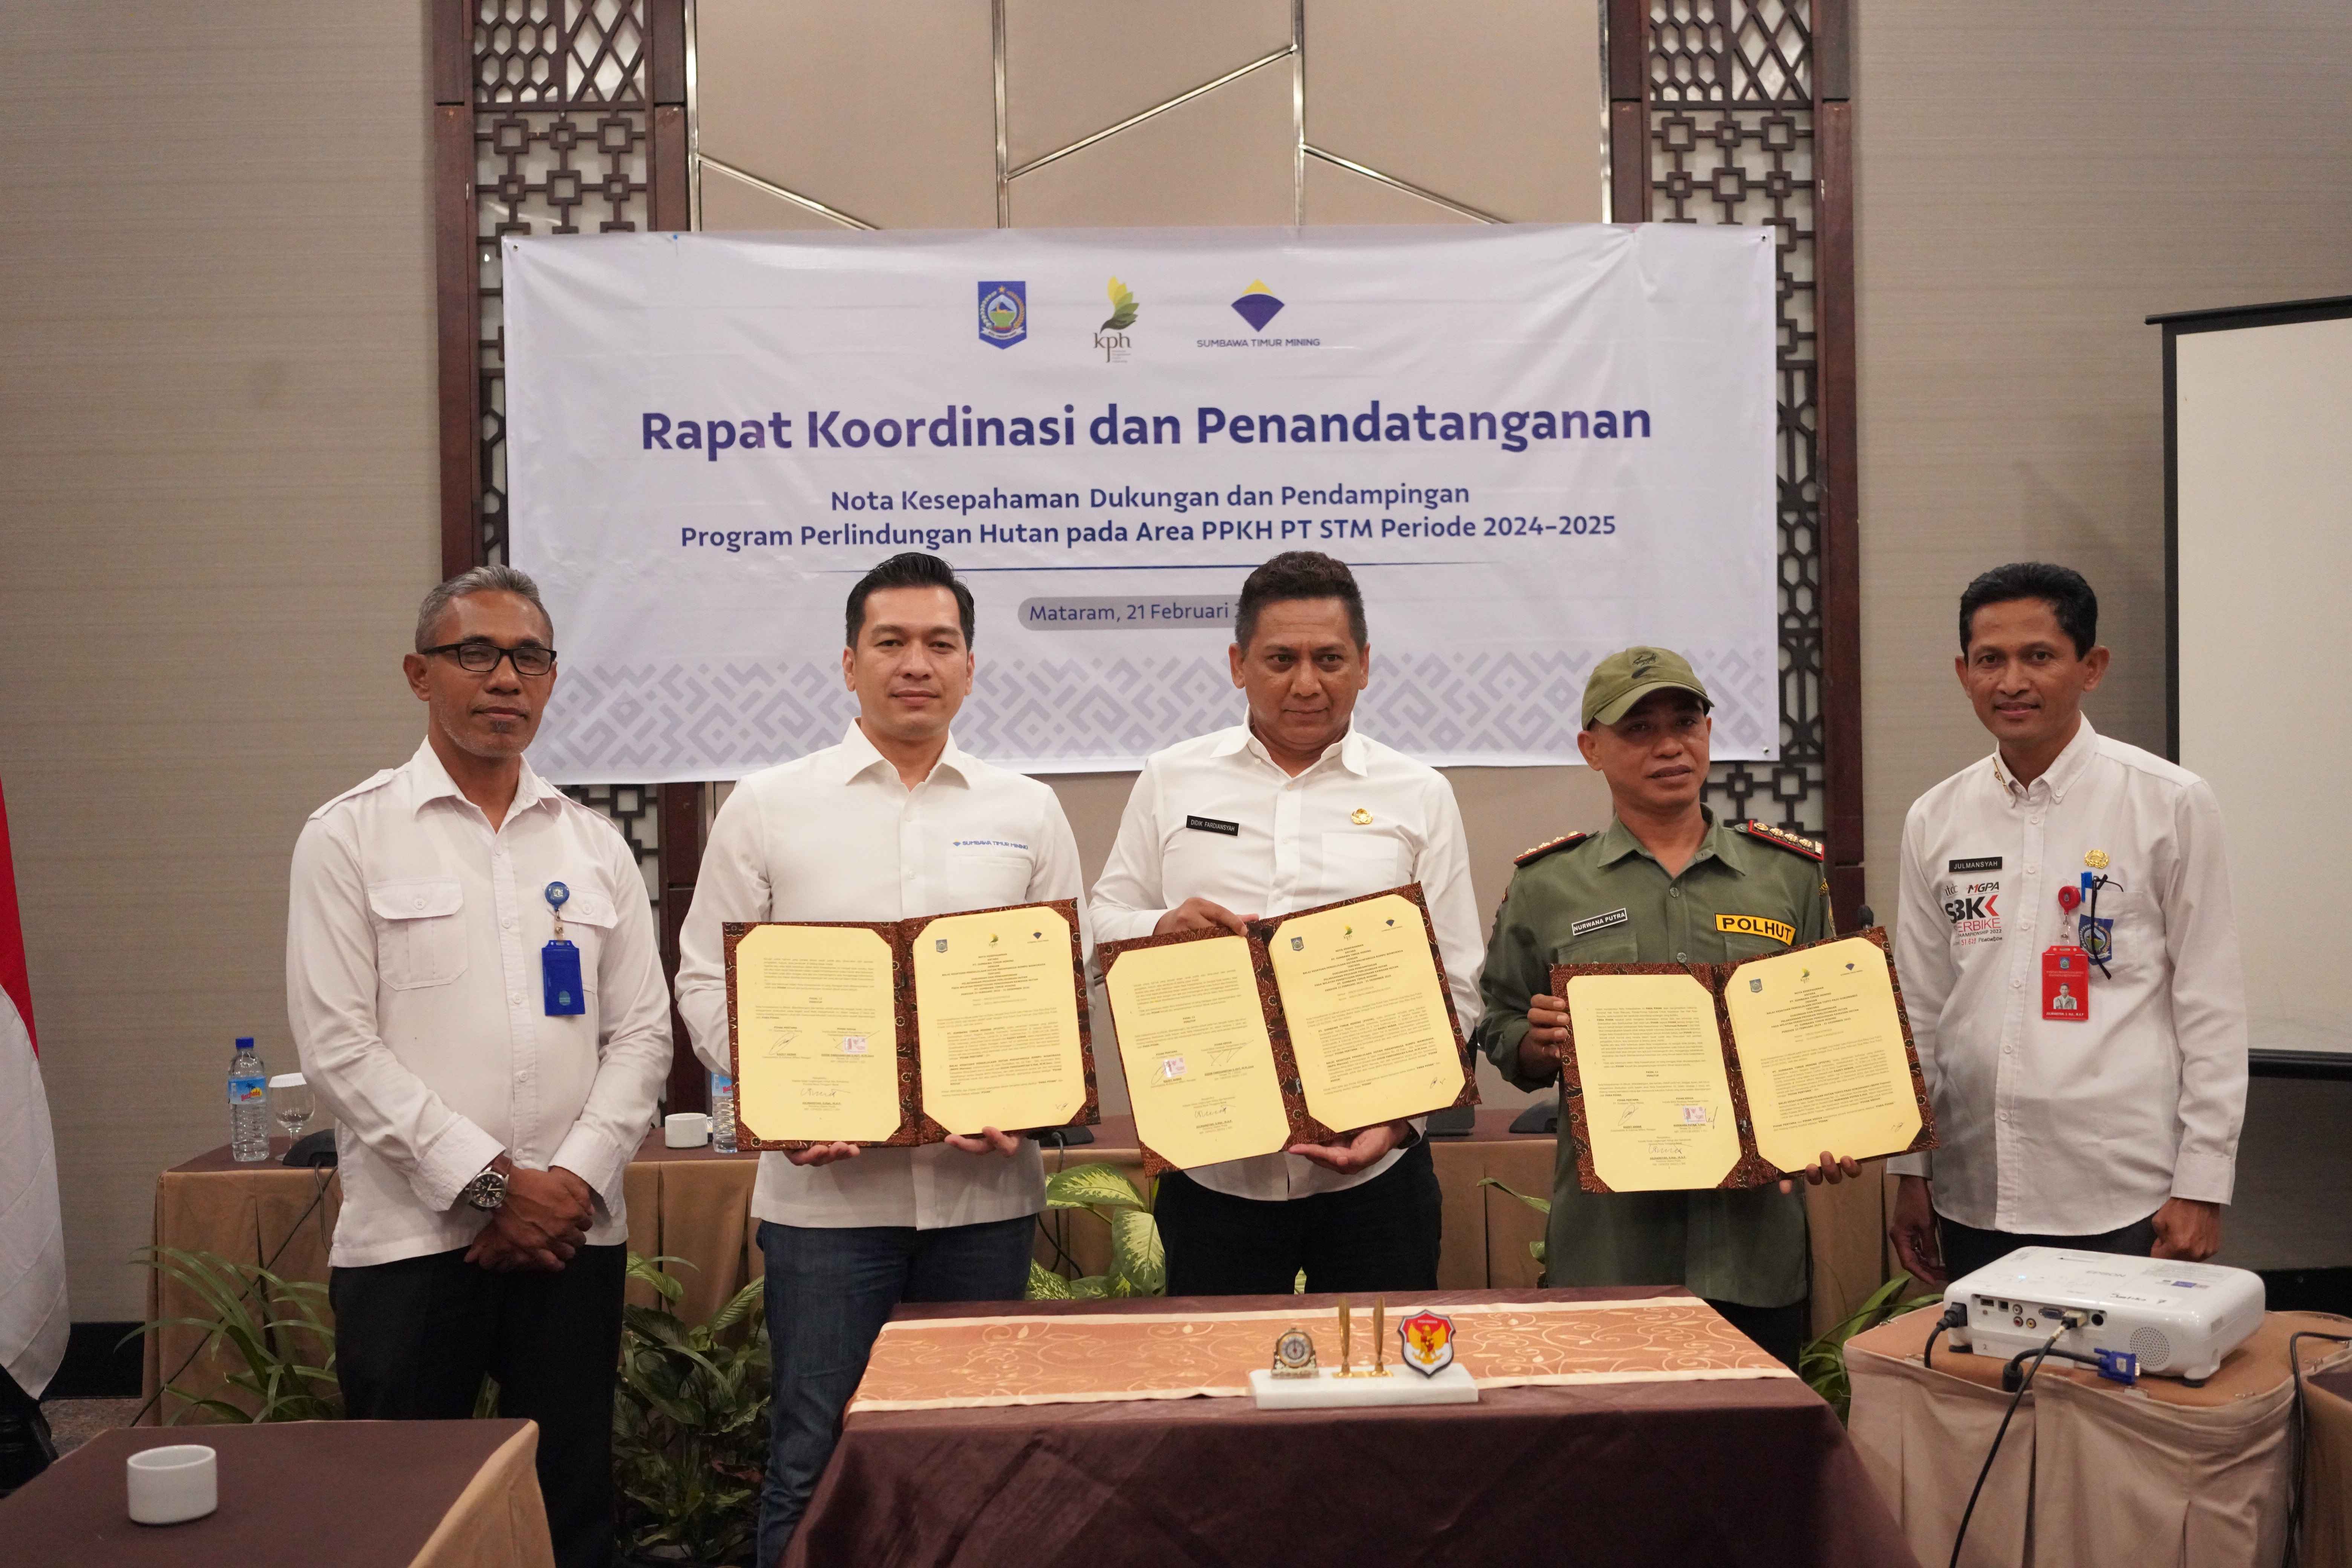 PT Sumbawa Timur Mining and DLHK NTB Sign MoU for Forest Protection